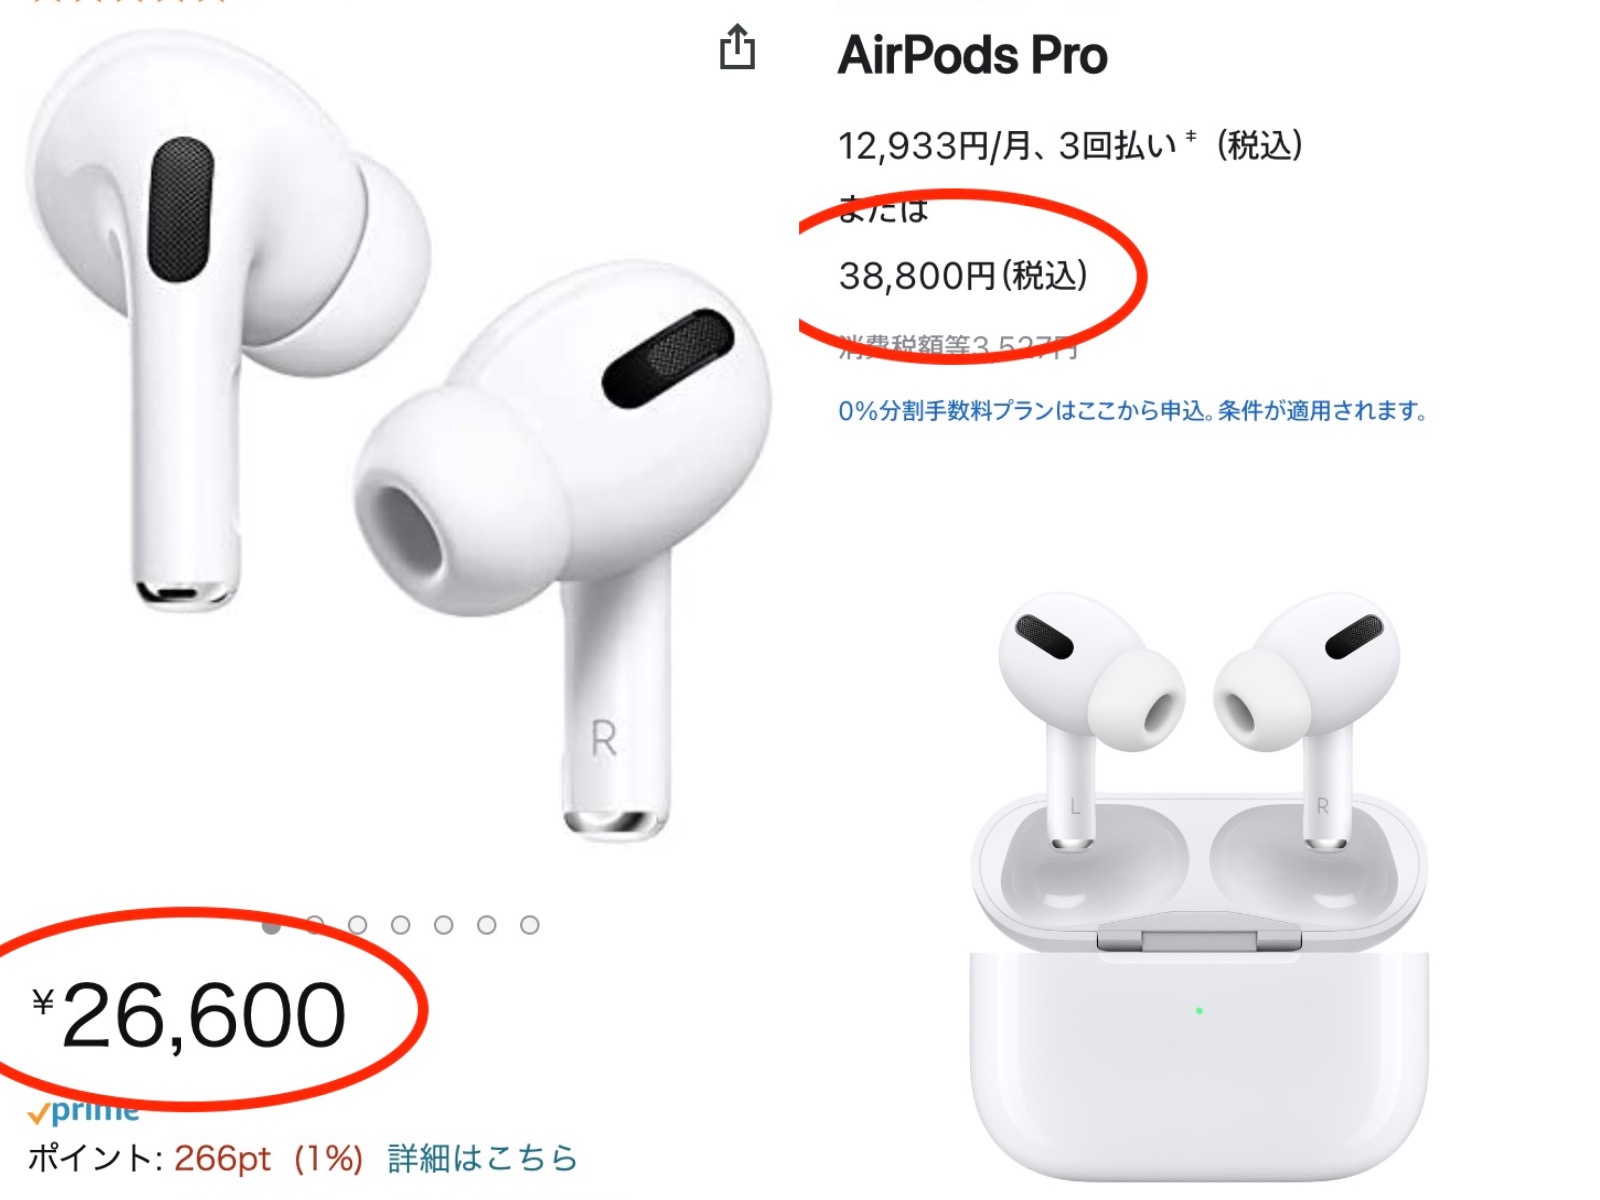 AirPods-Pro-Old-Price-at-amazon.jpg